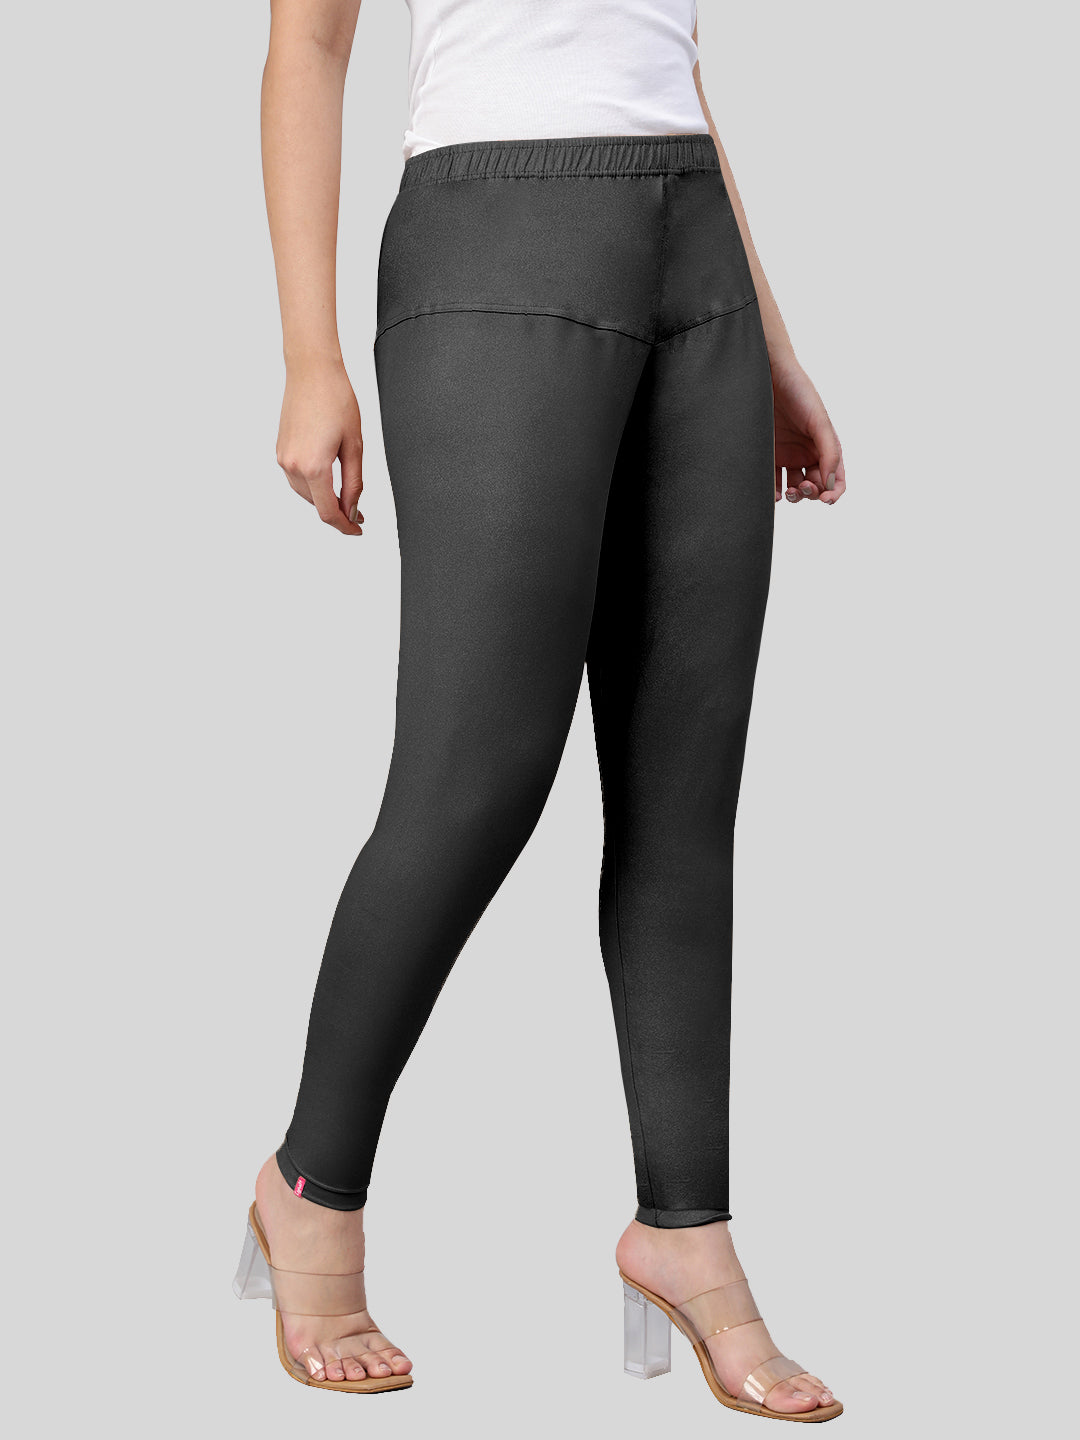 4 Way Lycra Legging With Diamond Cut in Kolkata - Dealers, Manufacturers &  Suppliers - Justdial